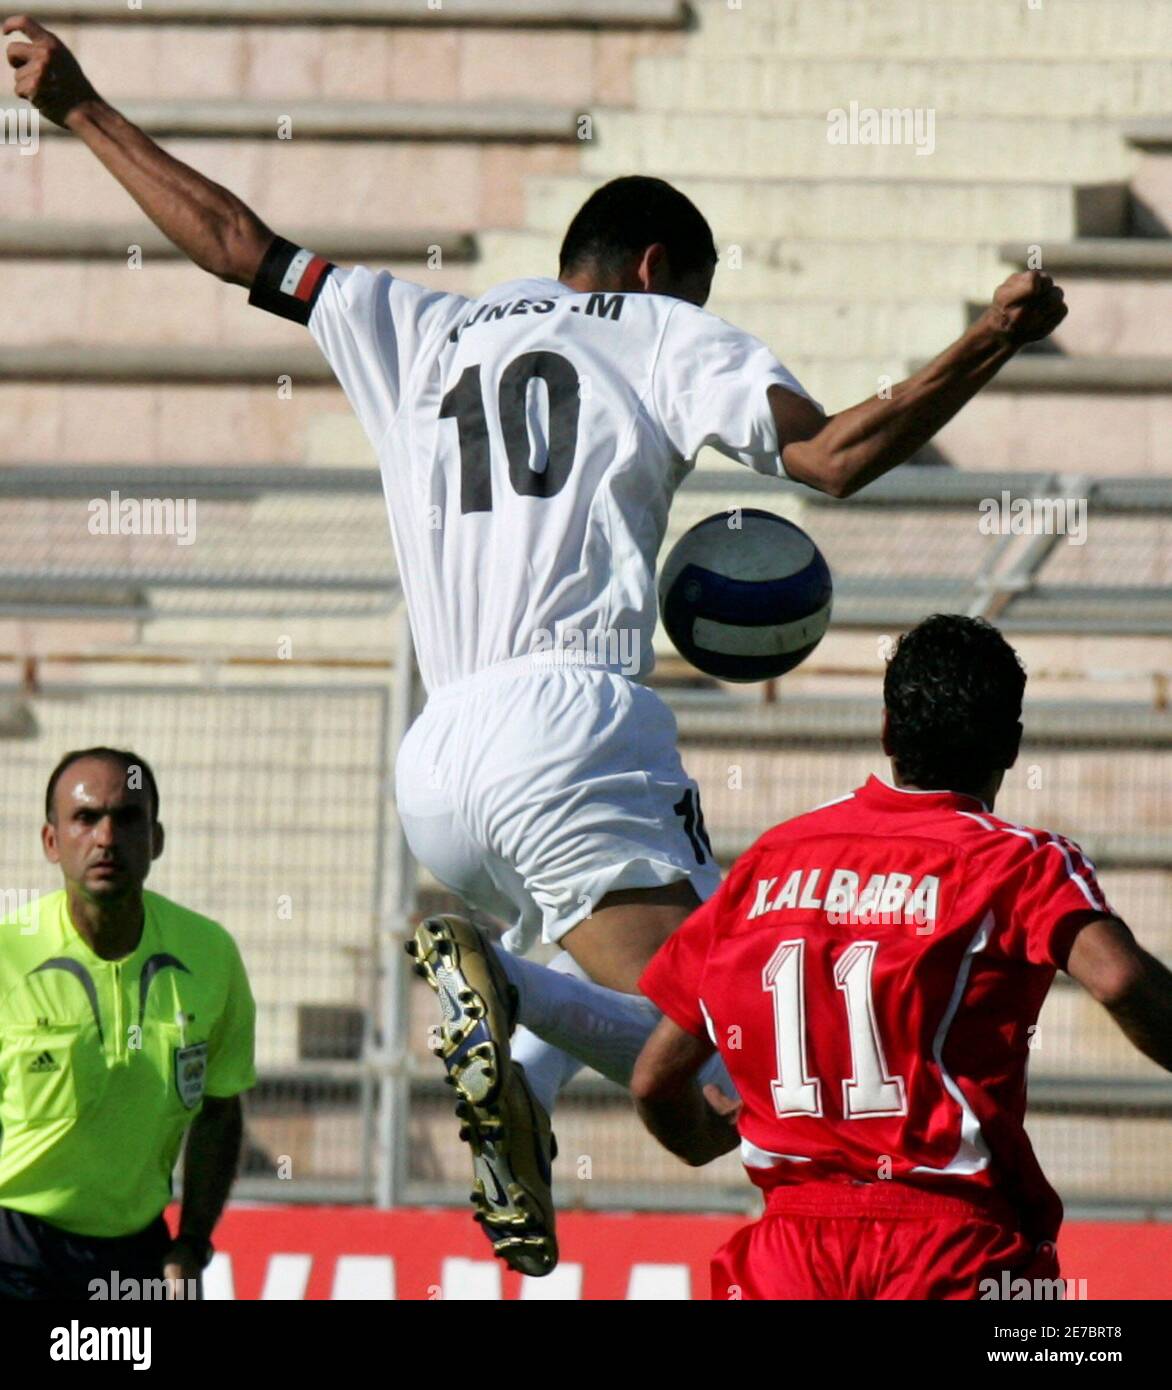 Iraq's Younes Khalef (L) jumps for the ball with Syria's Khaled Al Baba  during their West Asian Football Federation Championship soccer match at  Amman International Stadium June 22, 2007. REUTERS/Muhammad Hamed (JORDAN